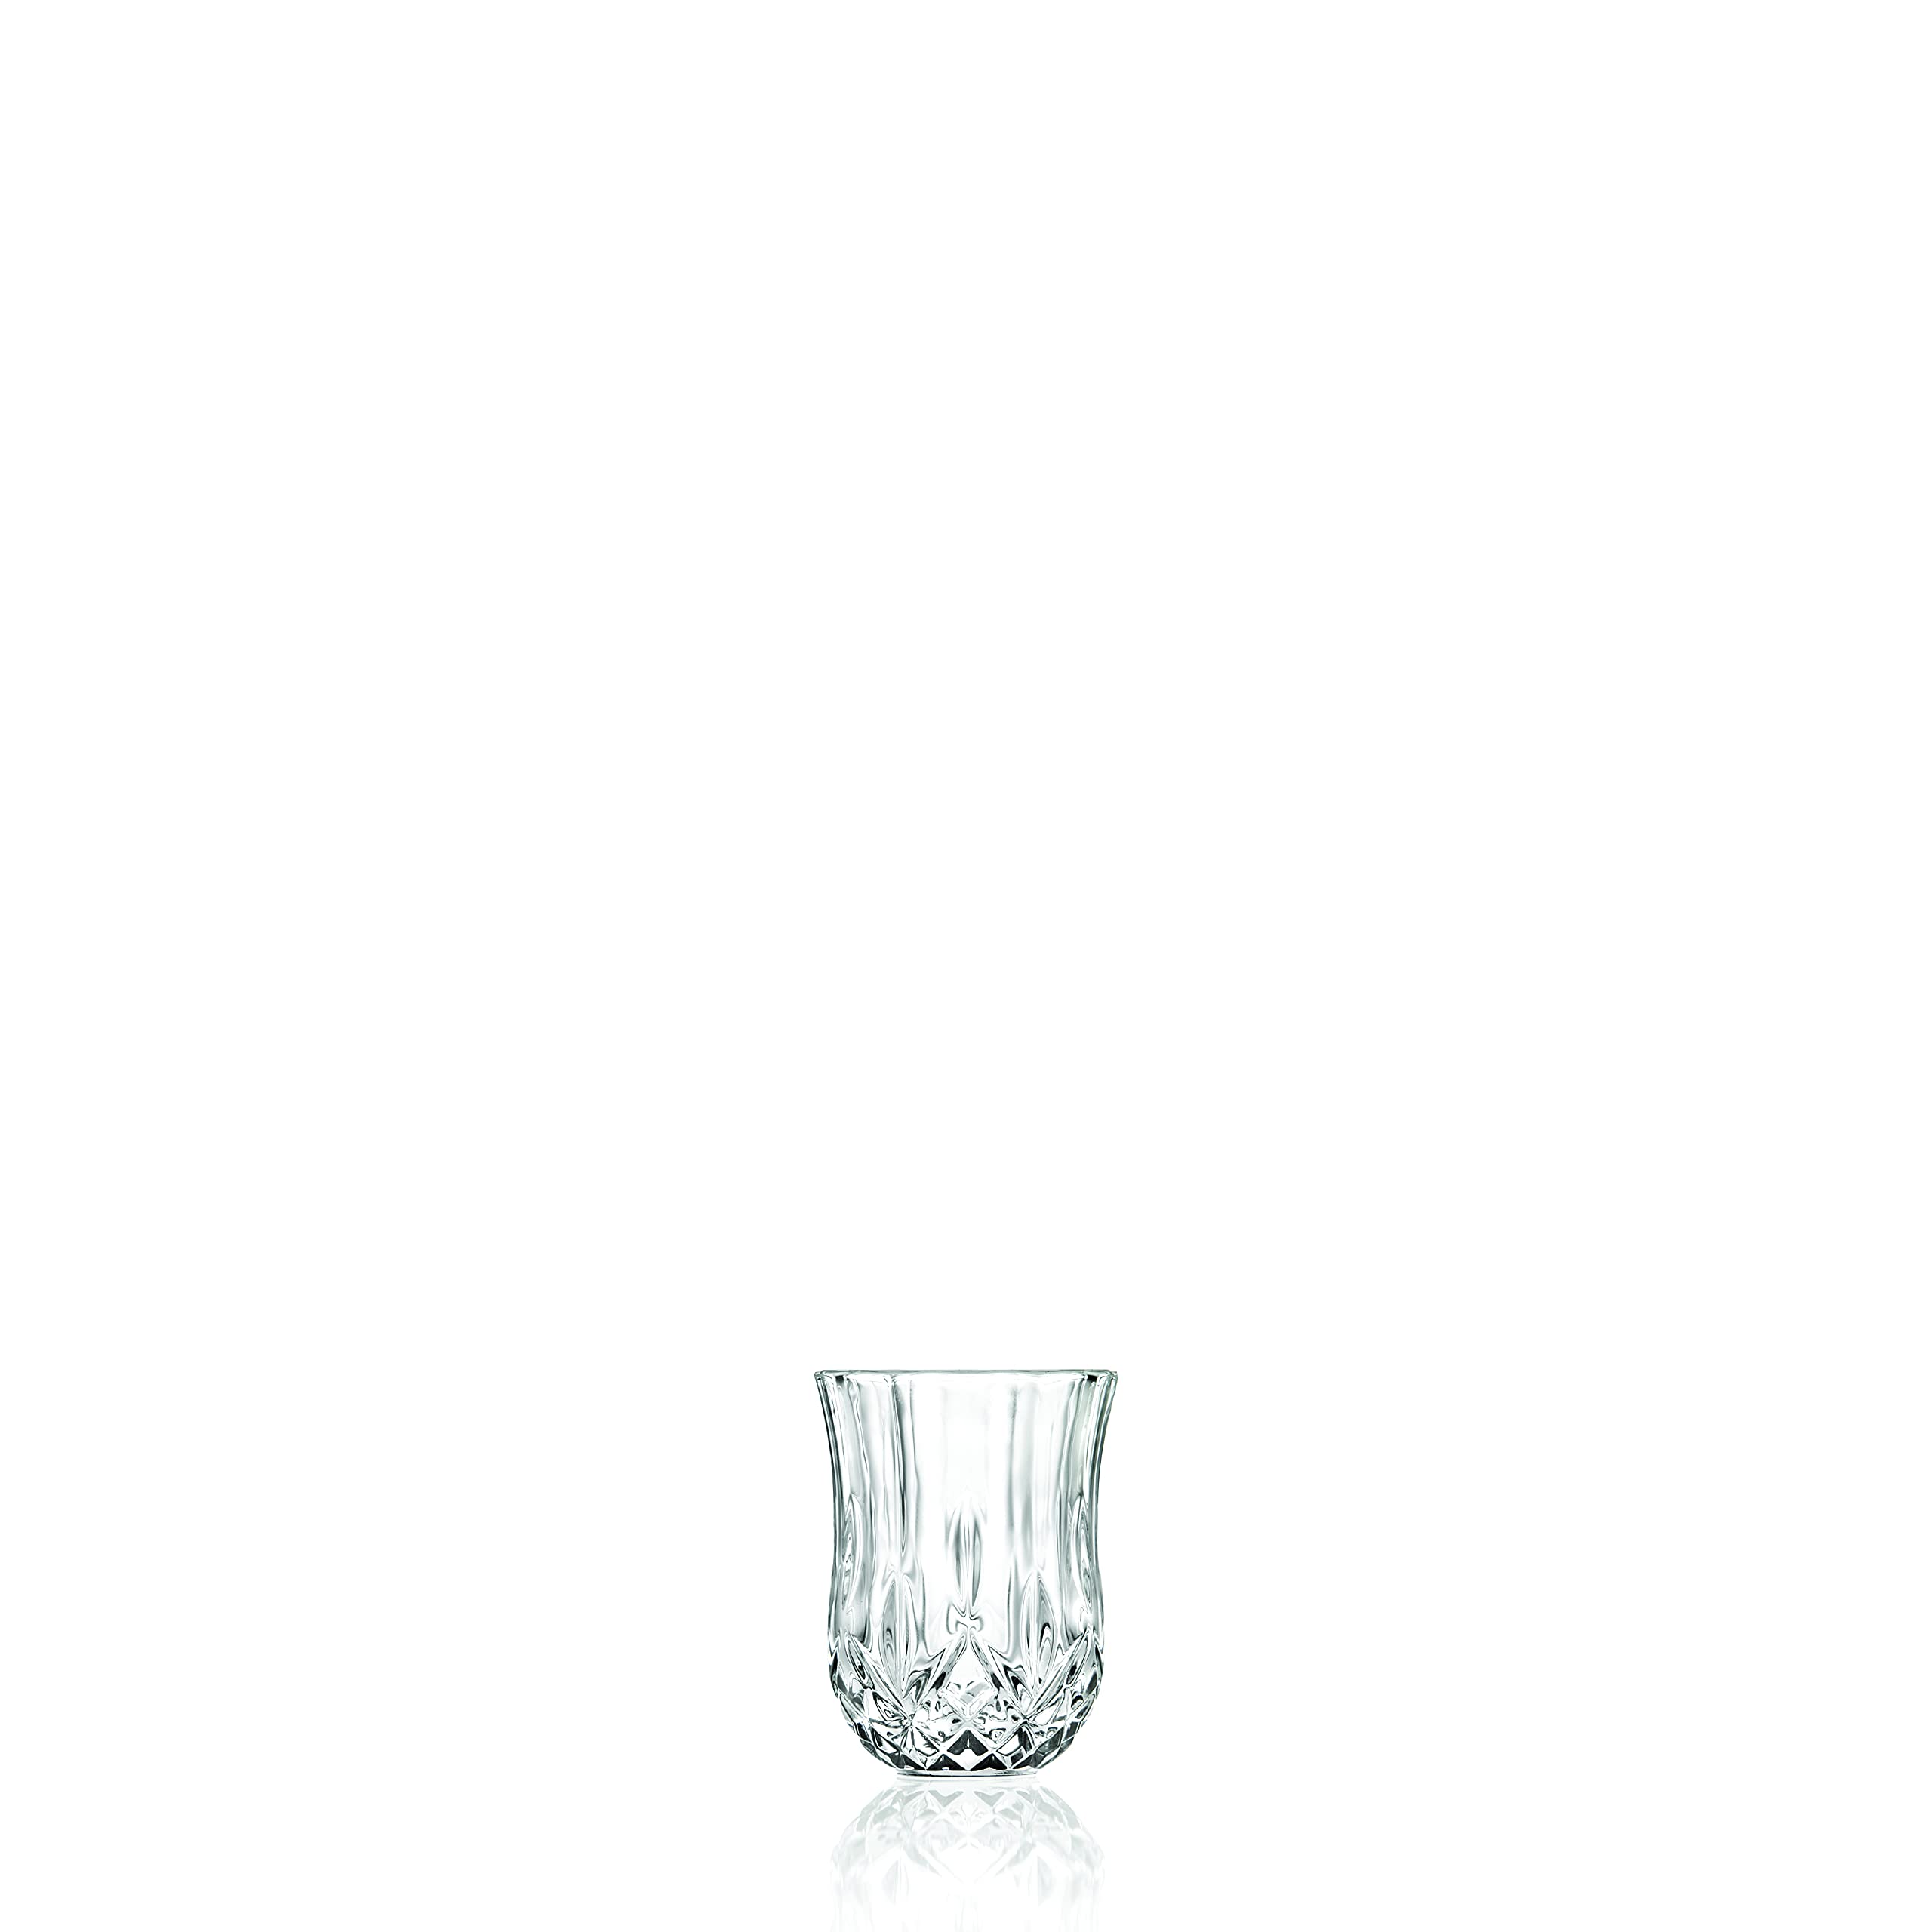 Barski Shot Glass - Set of 6 Glasses - Crystal Glass - Beautifully Designed - Use it for - Shot - Vodka - Liquor - Cordial - Each Glass is 2 oz Made in Europe